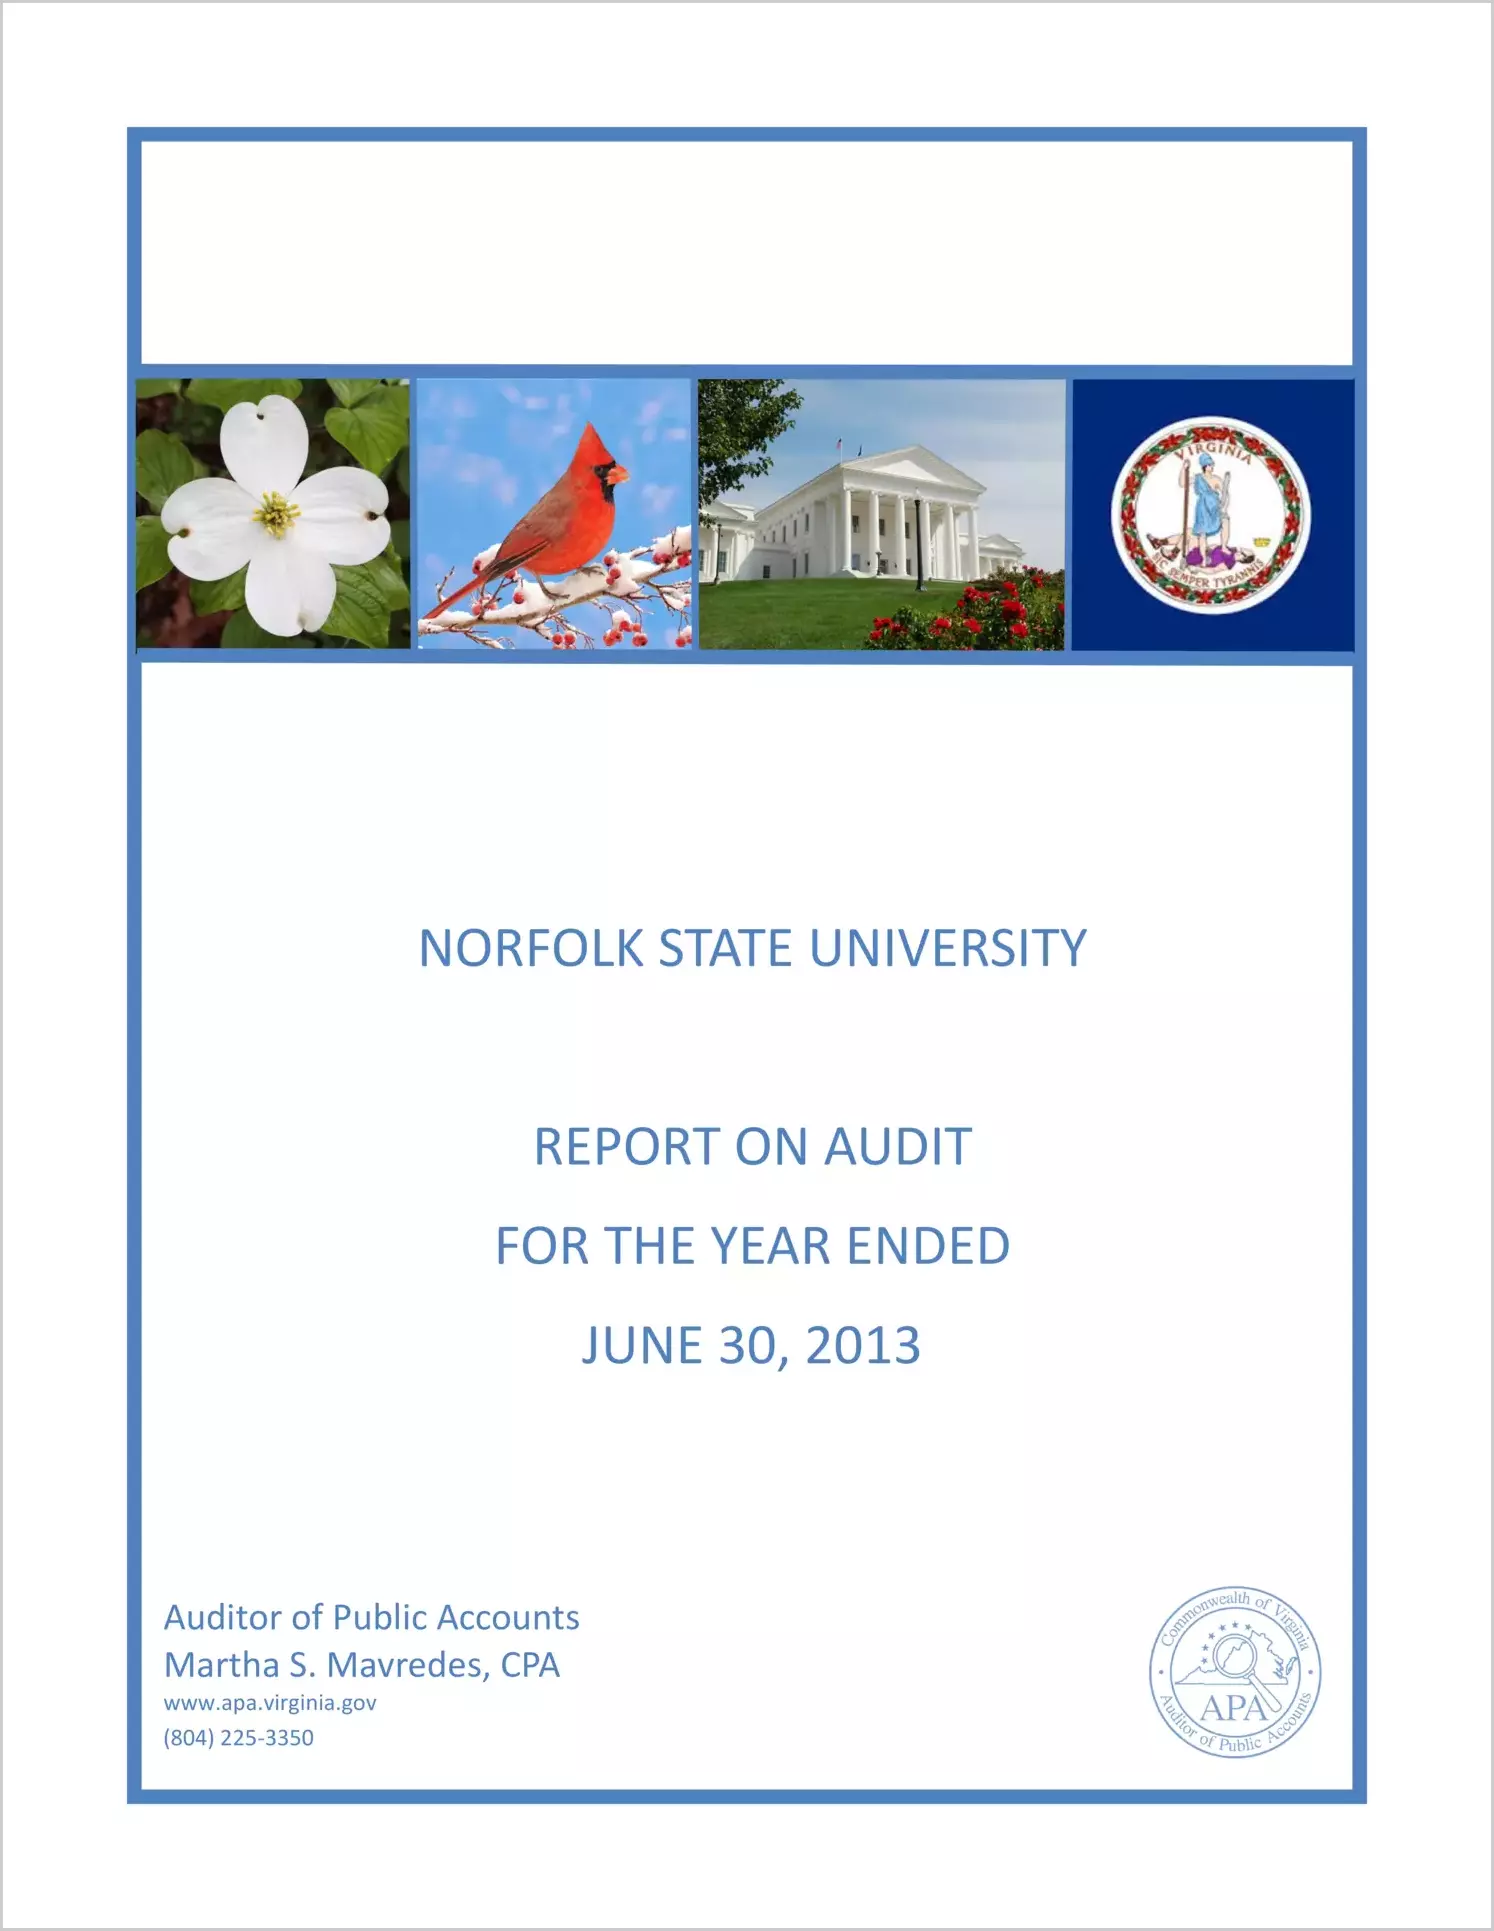 Norfolk State University report on audit for the year ended June 30, 2013